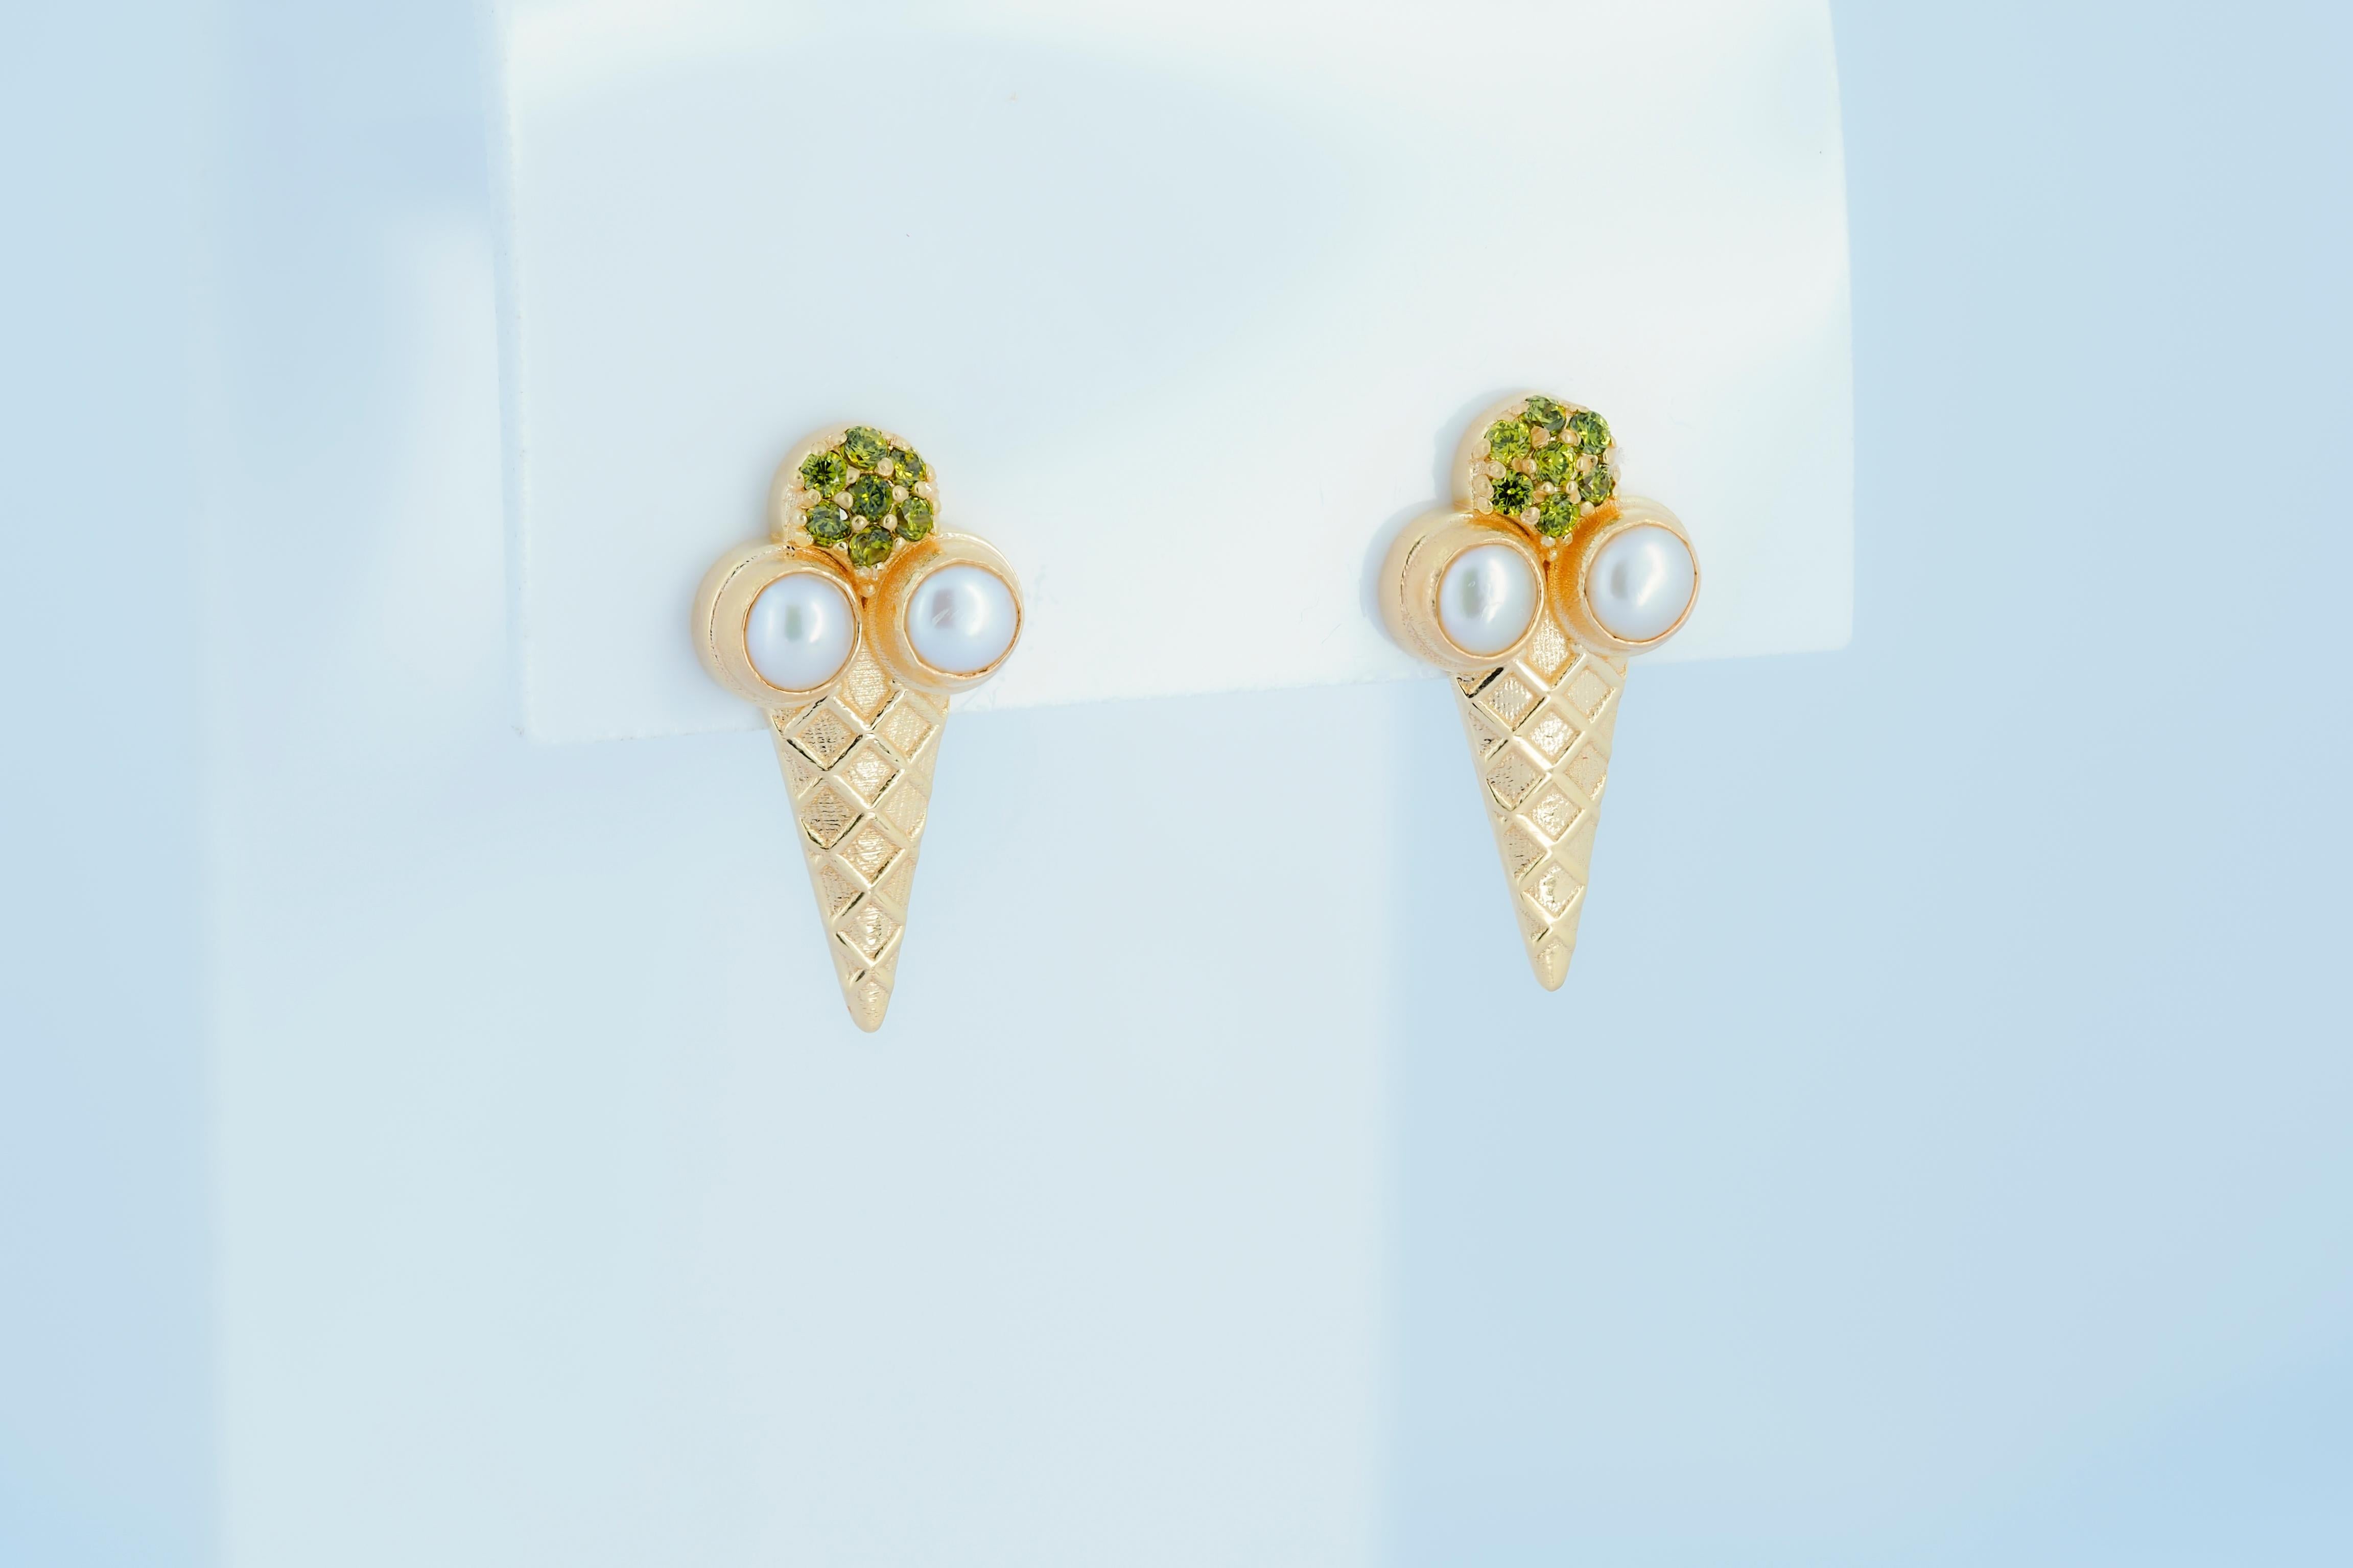 Women's Ice cream funny earrings studs with peridots and pearls in 14k gold For Sale